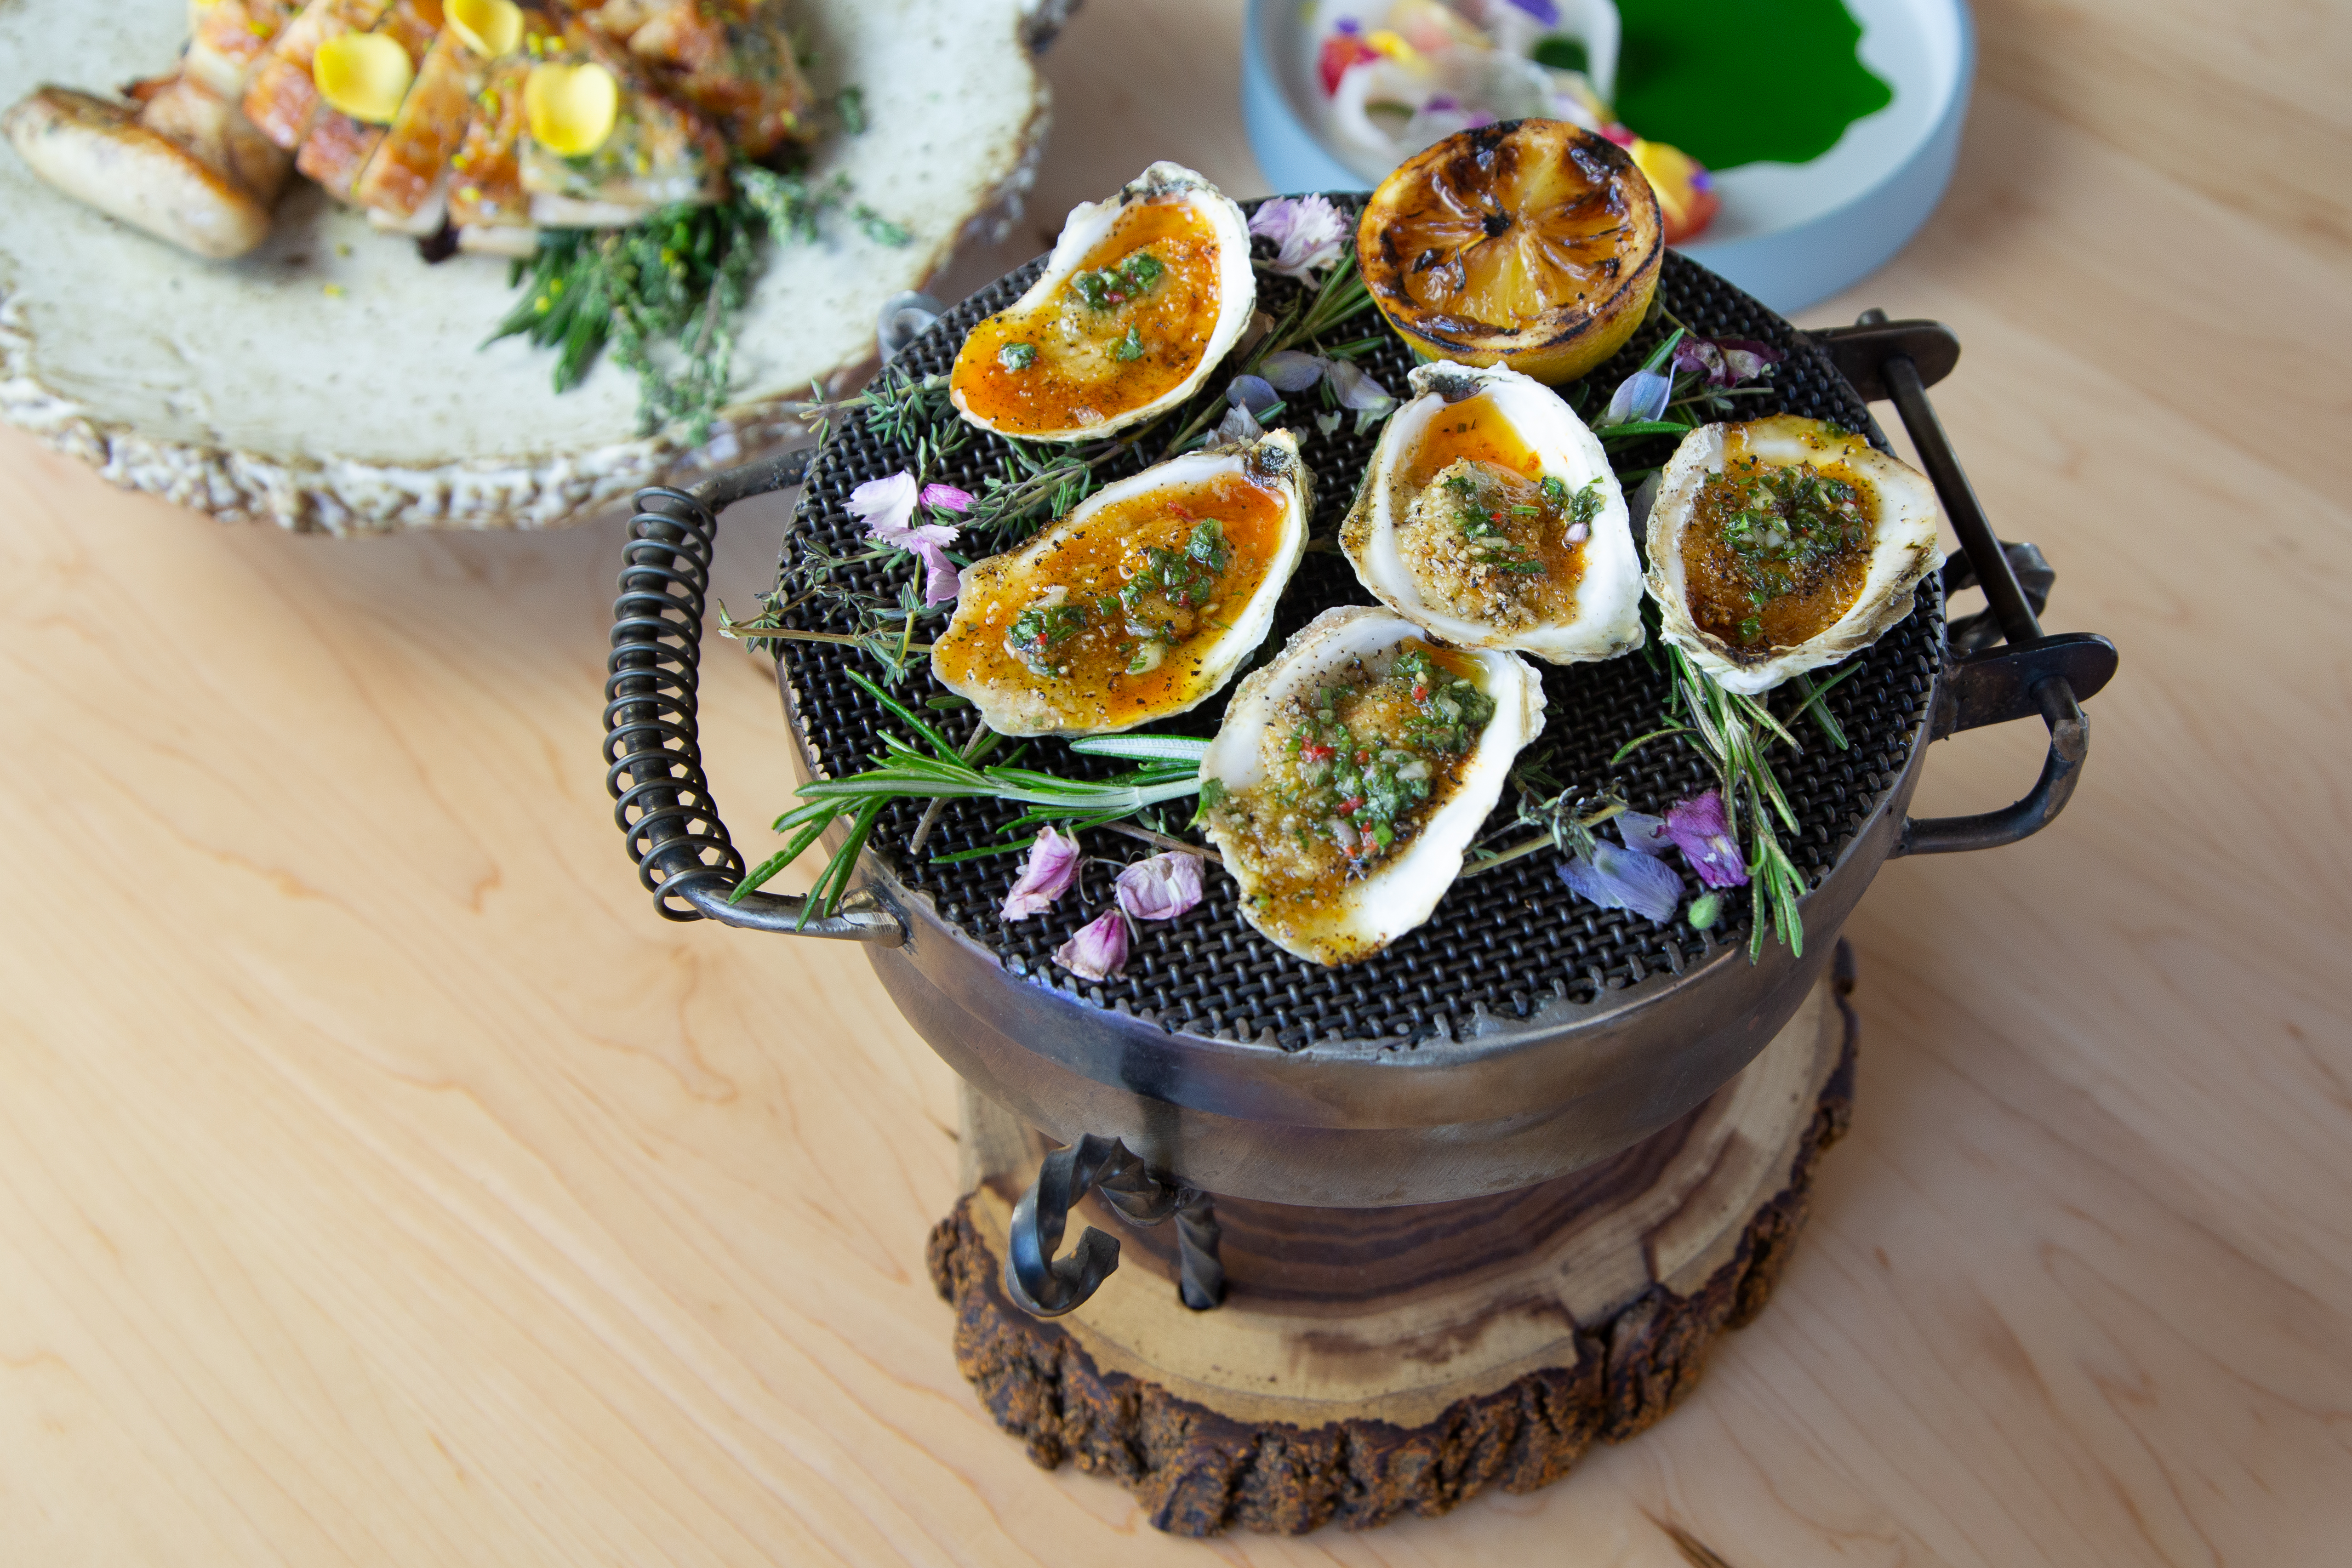 A cauldron of green-onion topped grilled oysters on the half shell, sitting on a light wood table among a couple other dishes of food.